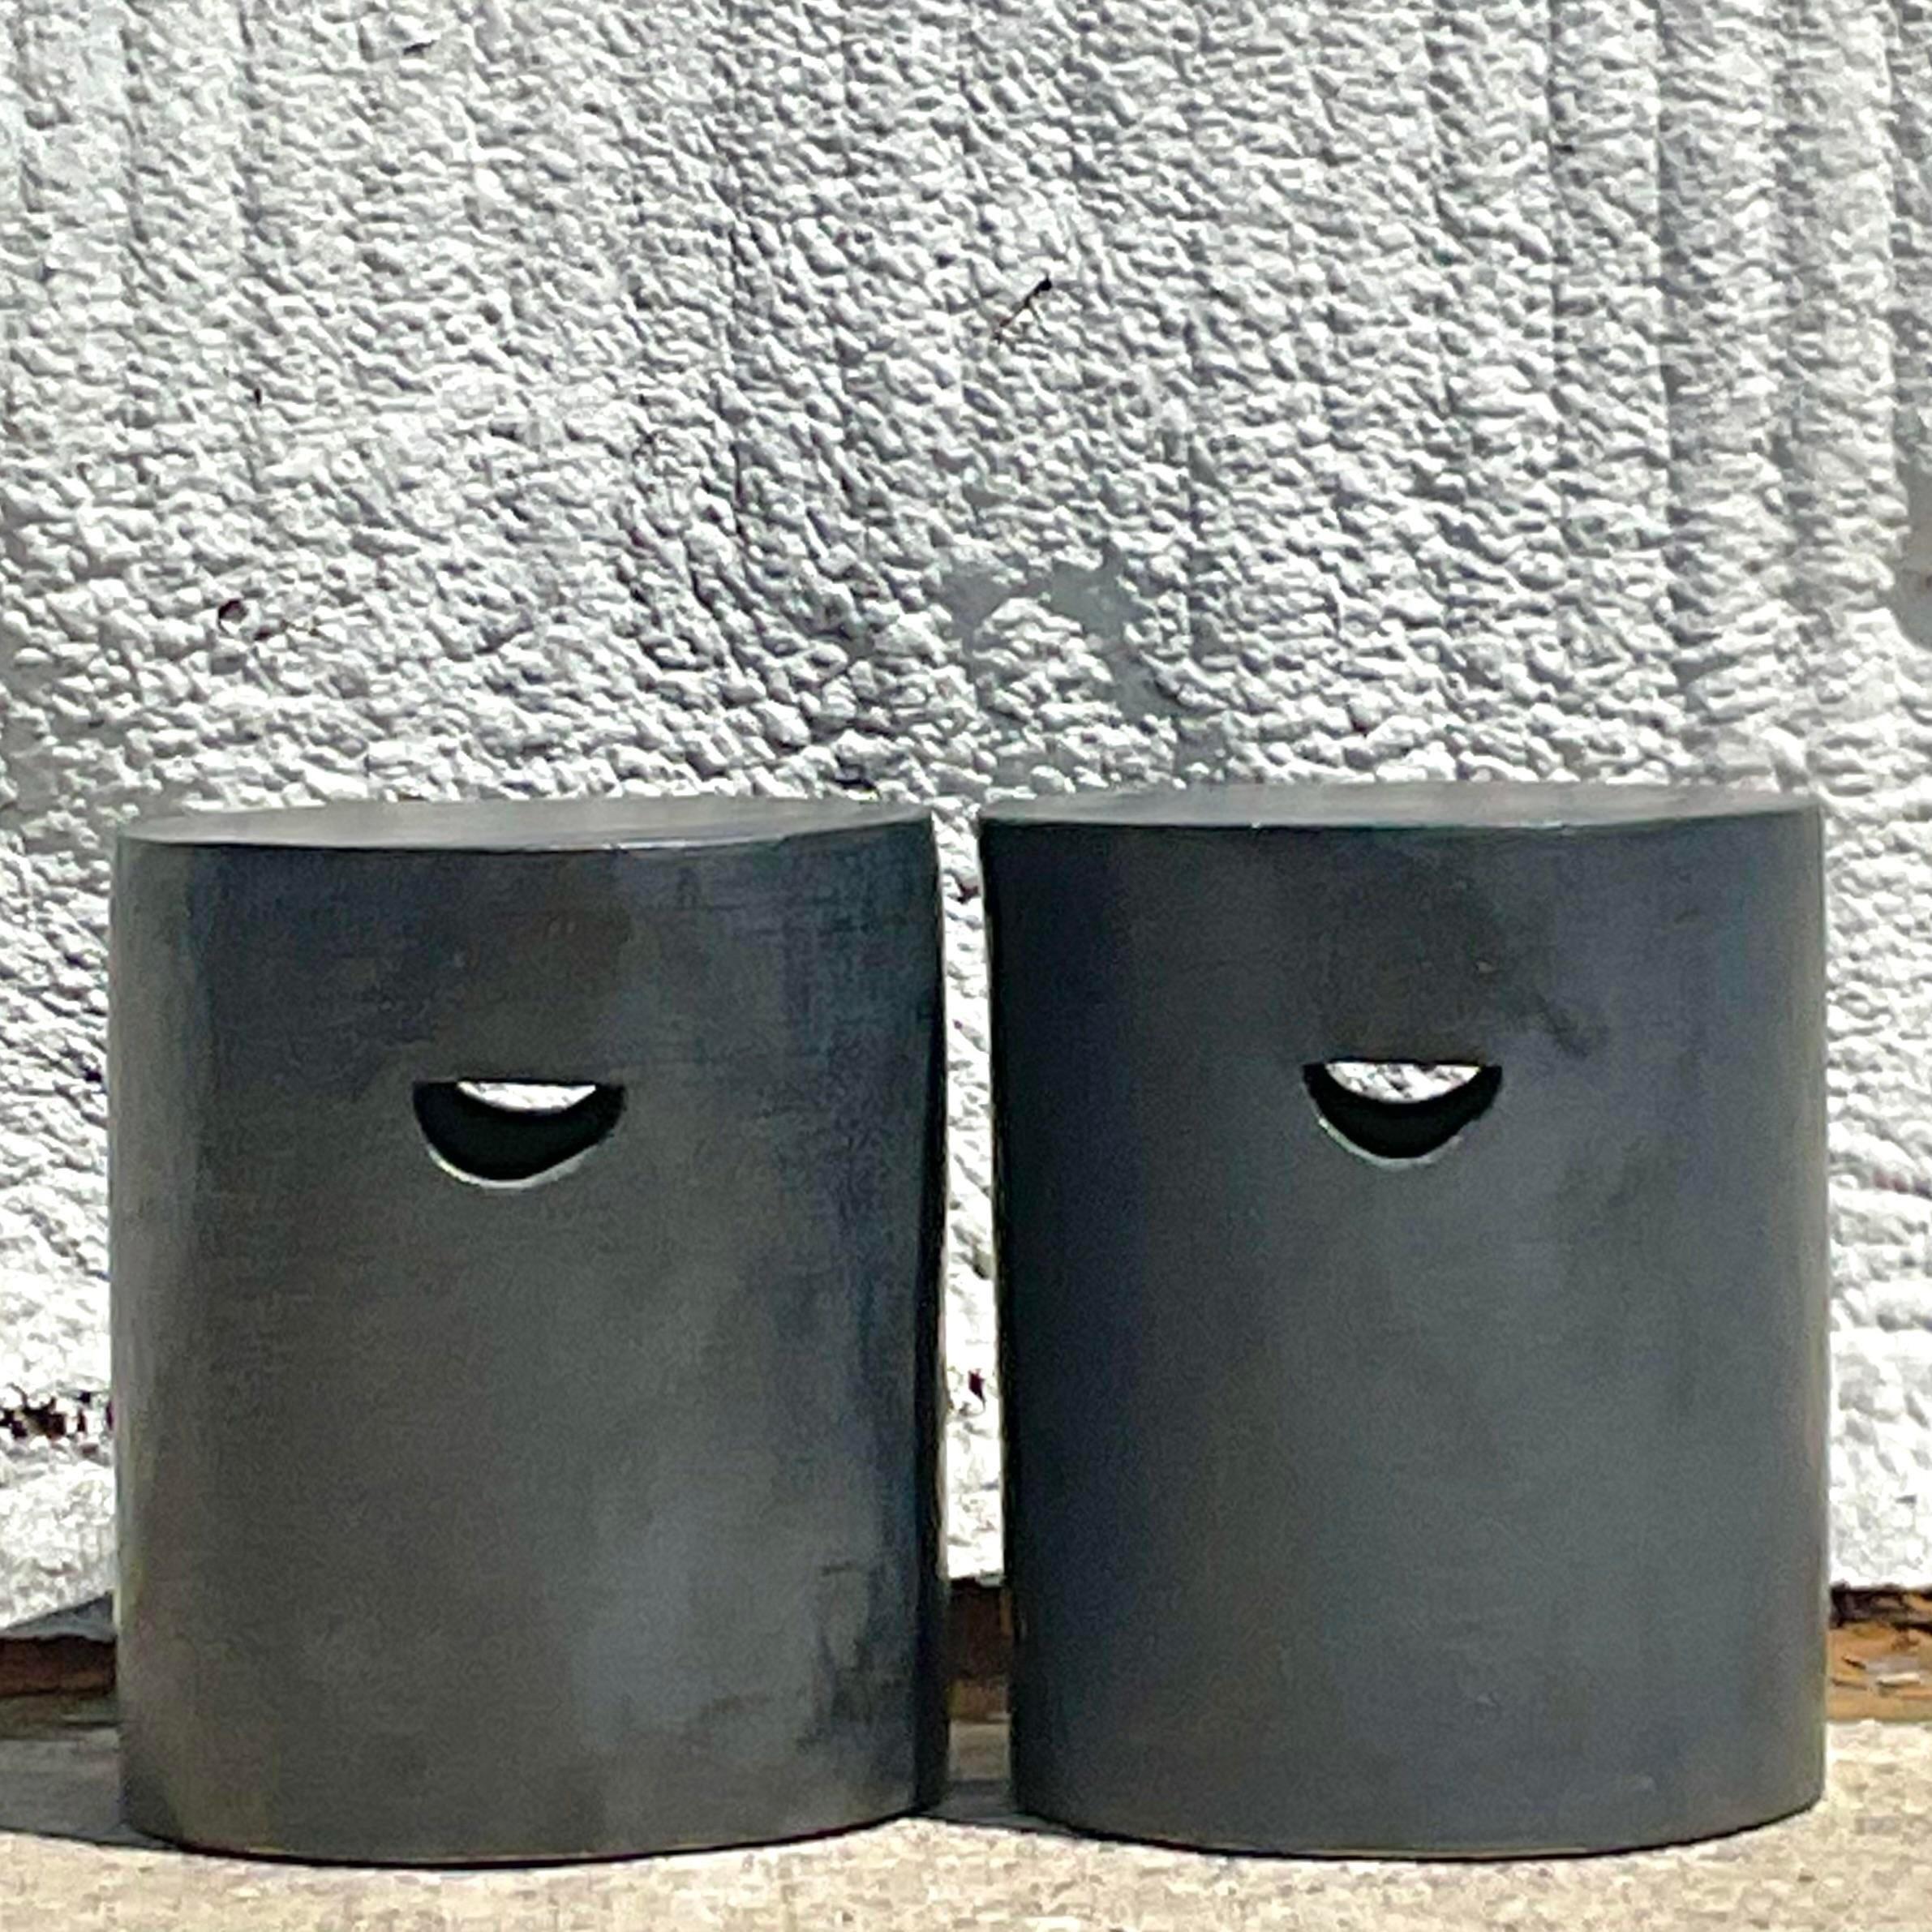 An incredible pair of vintage Boho low stools. A chic cylinder shape with cut out handles for easy movement. The most beautiful patinated finish in a deep charcoal grey. Acquired from a Palm Beach estate.